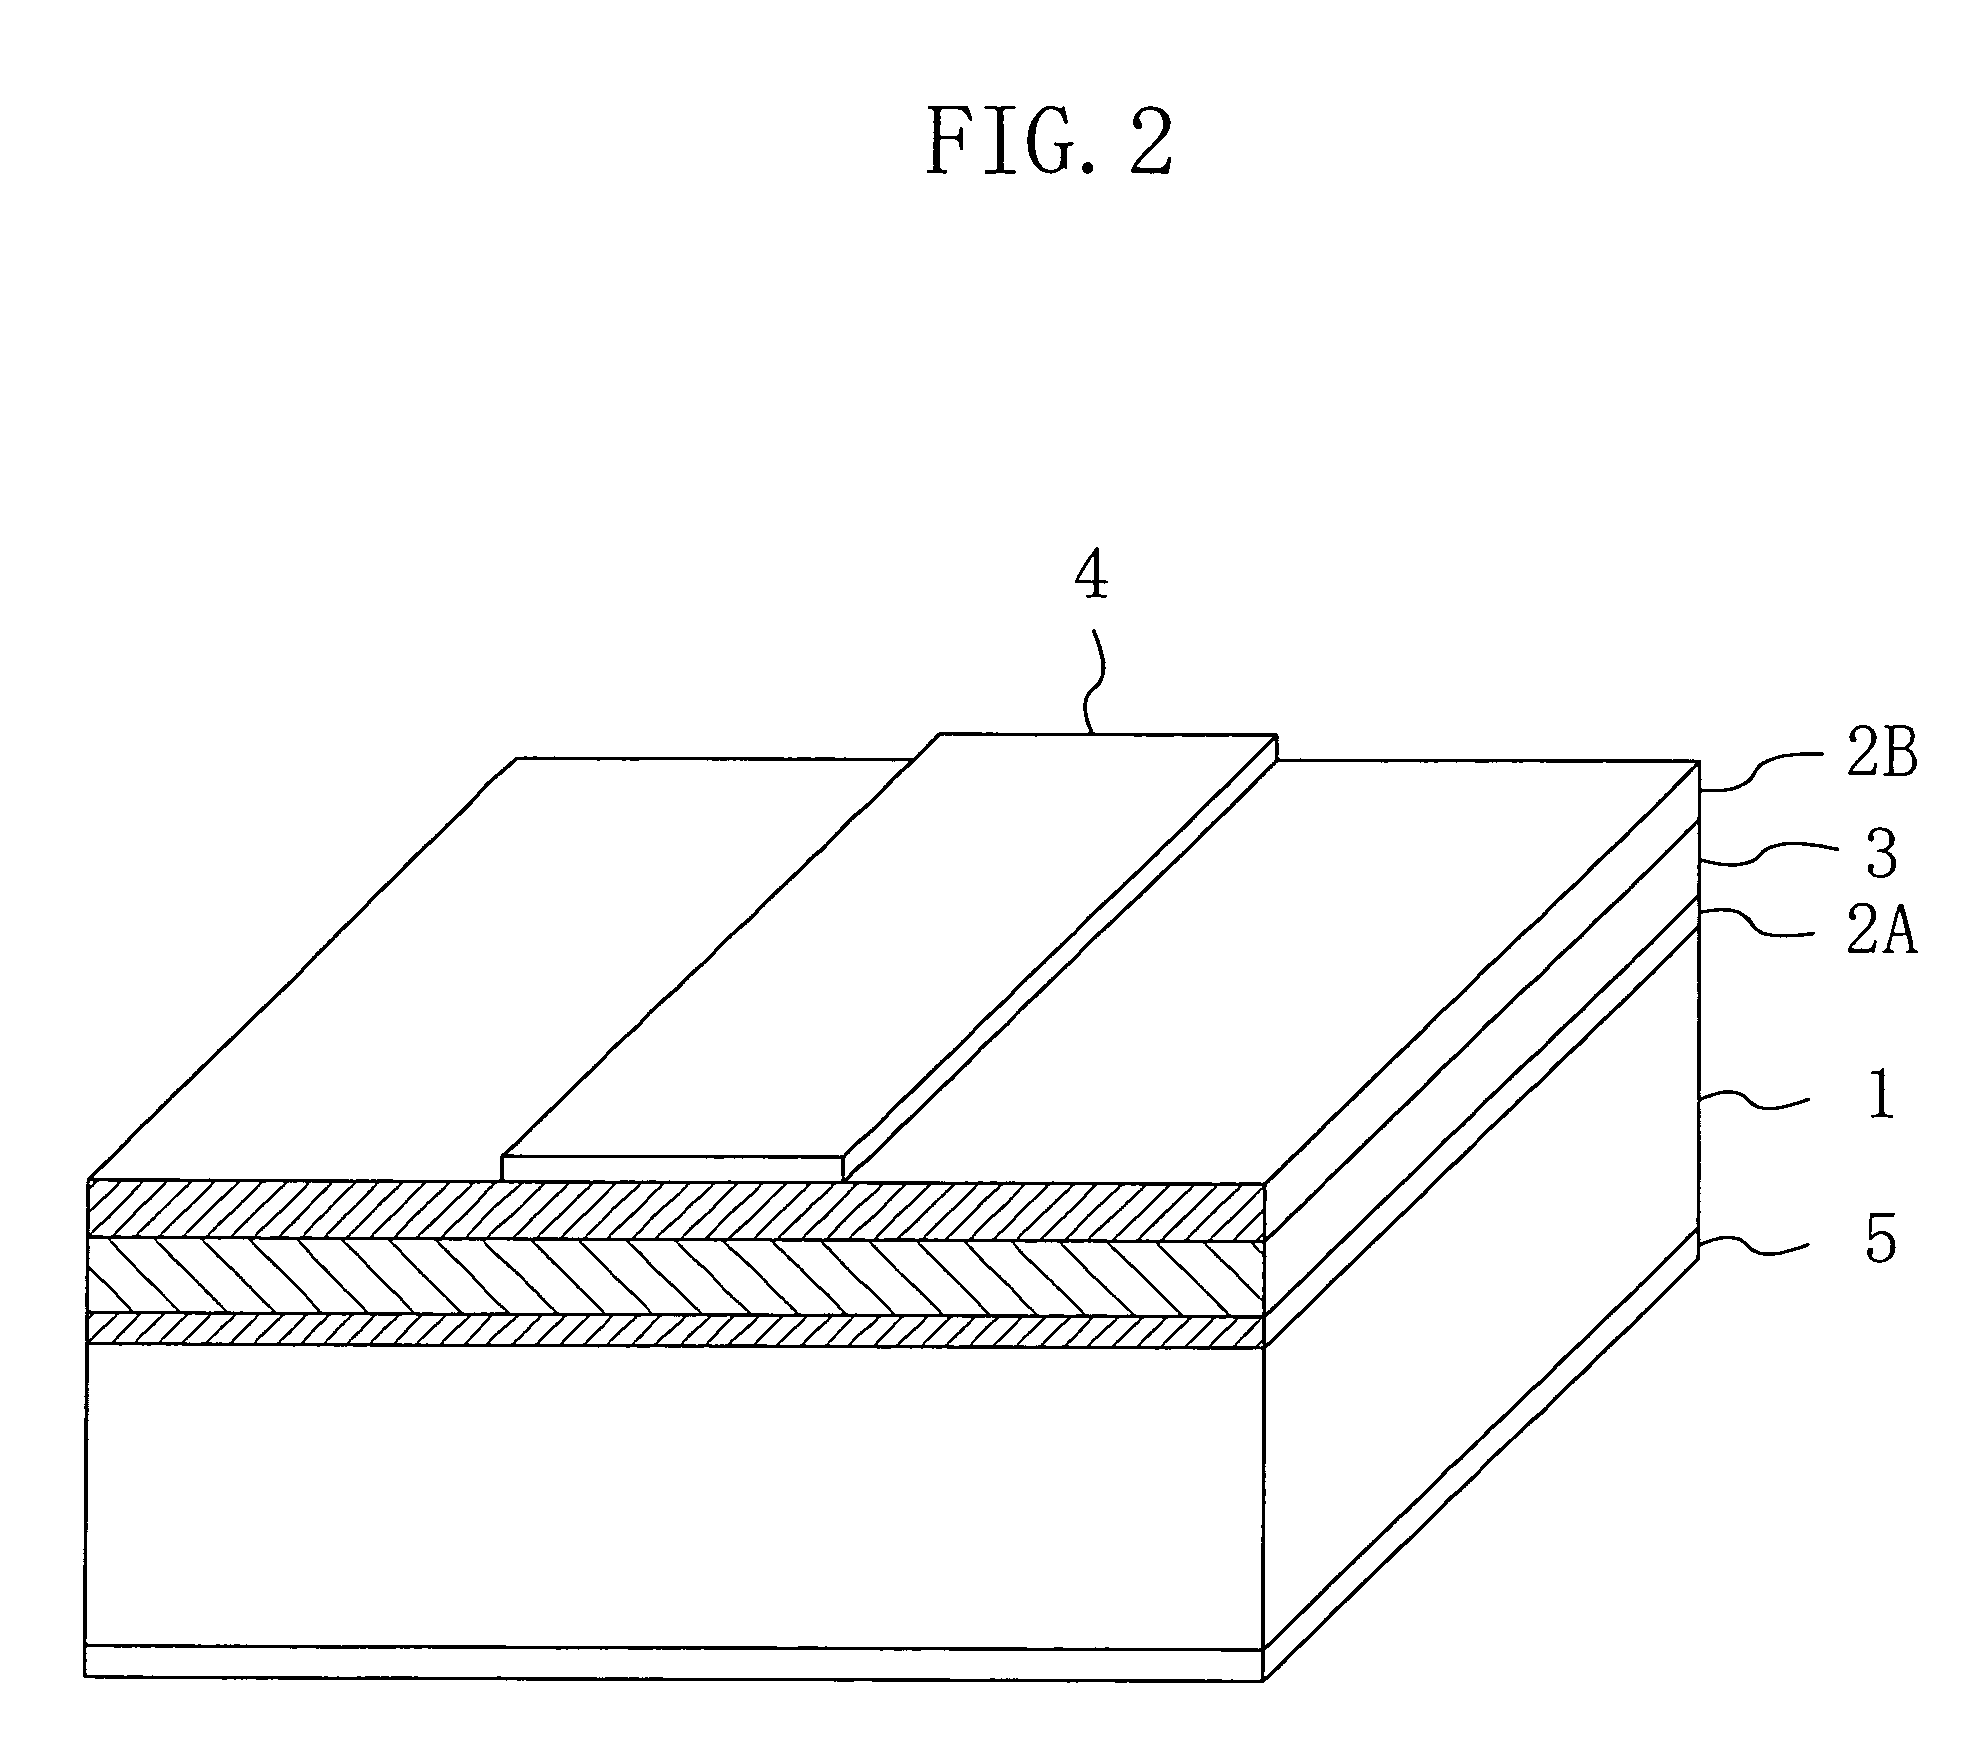 Microwave transmission line having dielectric film layers providing negative space charge effects